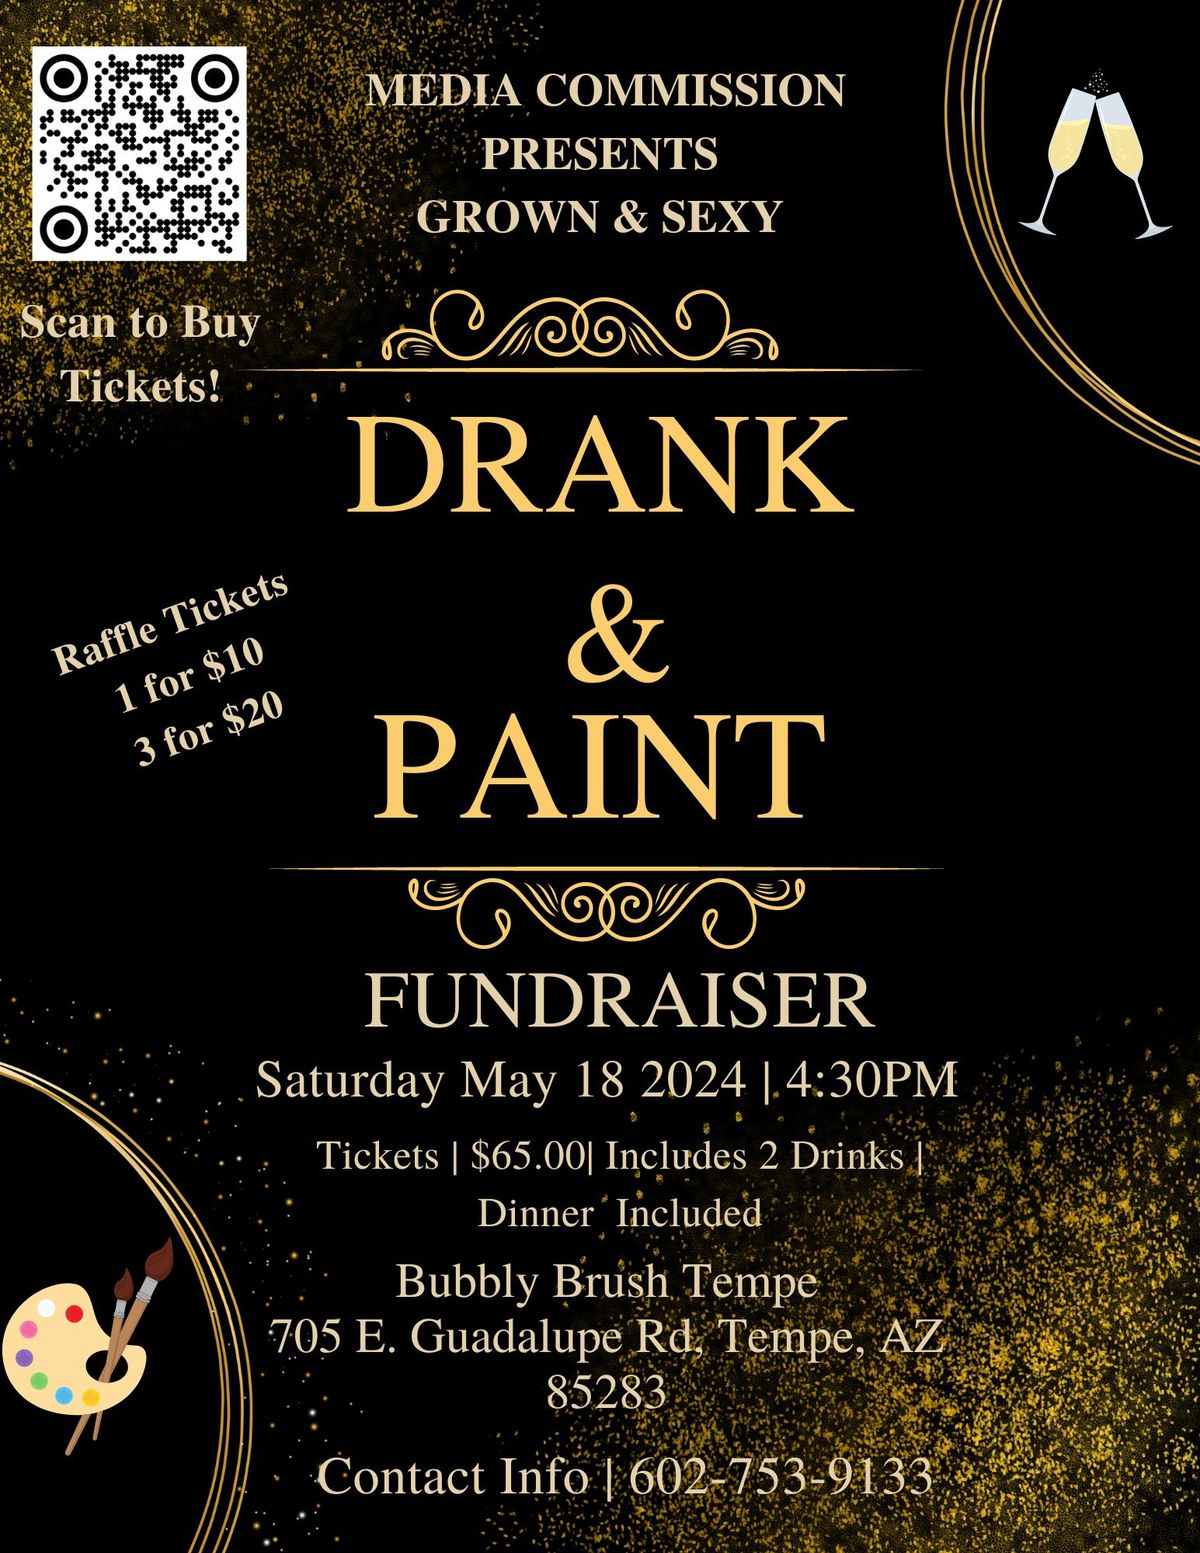 Media Commission Presents: Grown and Sexy - Drank & Paint Fundraiser